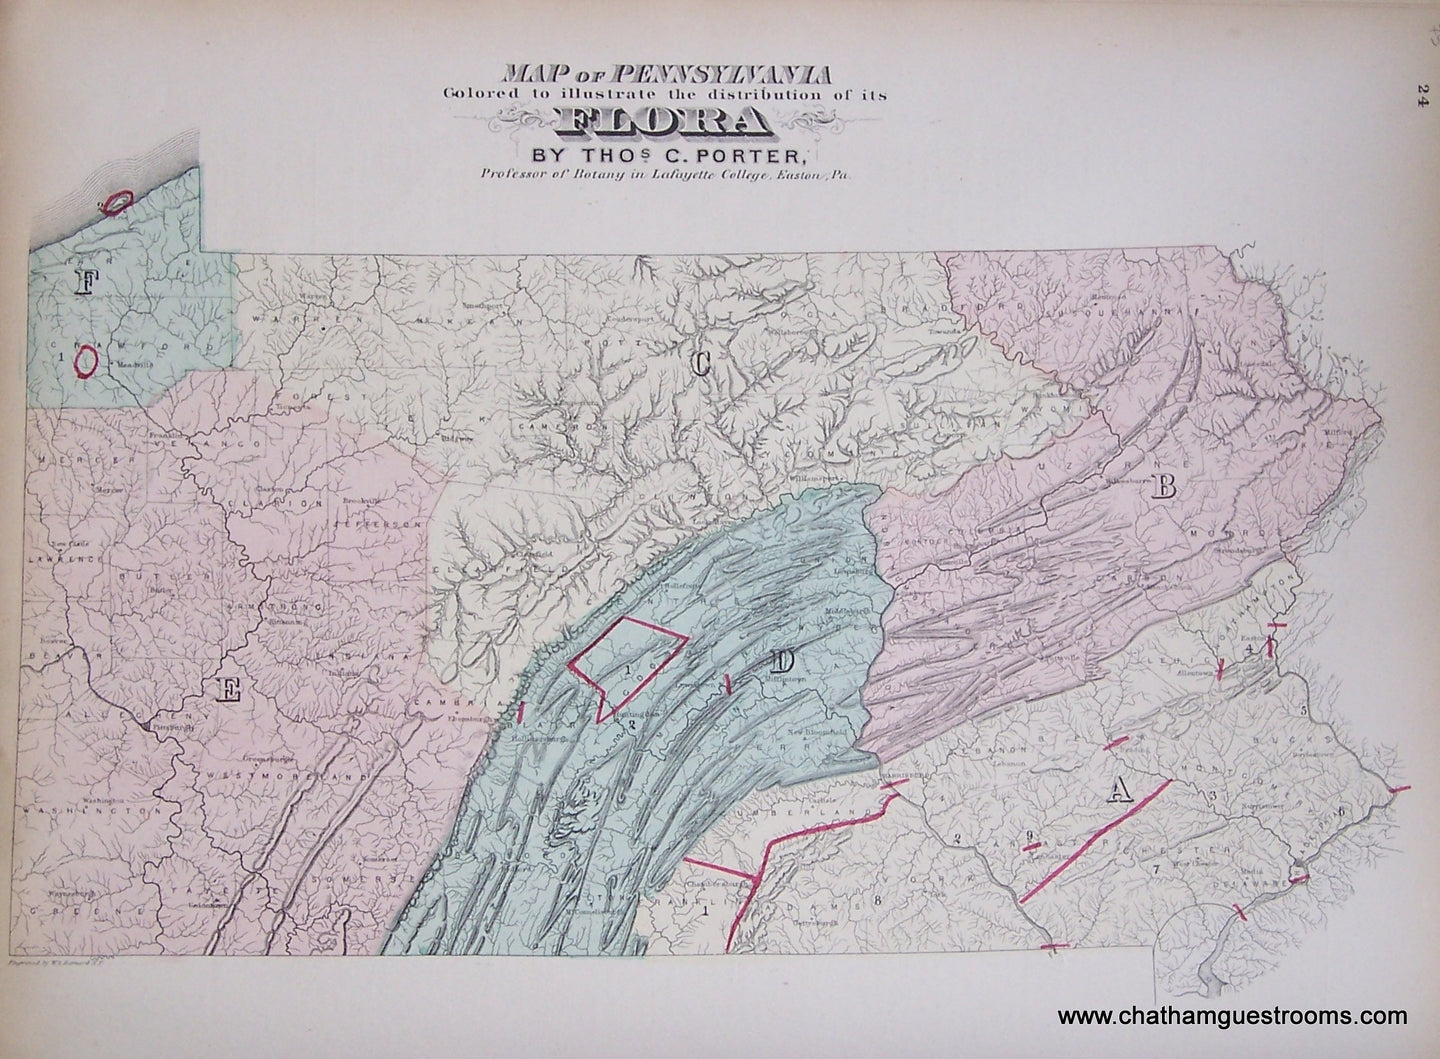 Antique-Hand-Colored-Geological-Map-Map-of-Pennsylvania-Colored-to-Illustrate-the-Distribution-of-its-Flora-United-States-Mid-Atlantic-1872-Walling-and-Gray-Maps-Of-Antiquity